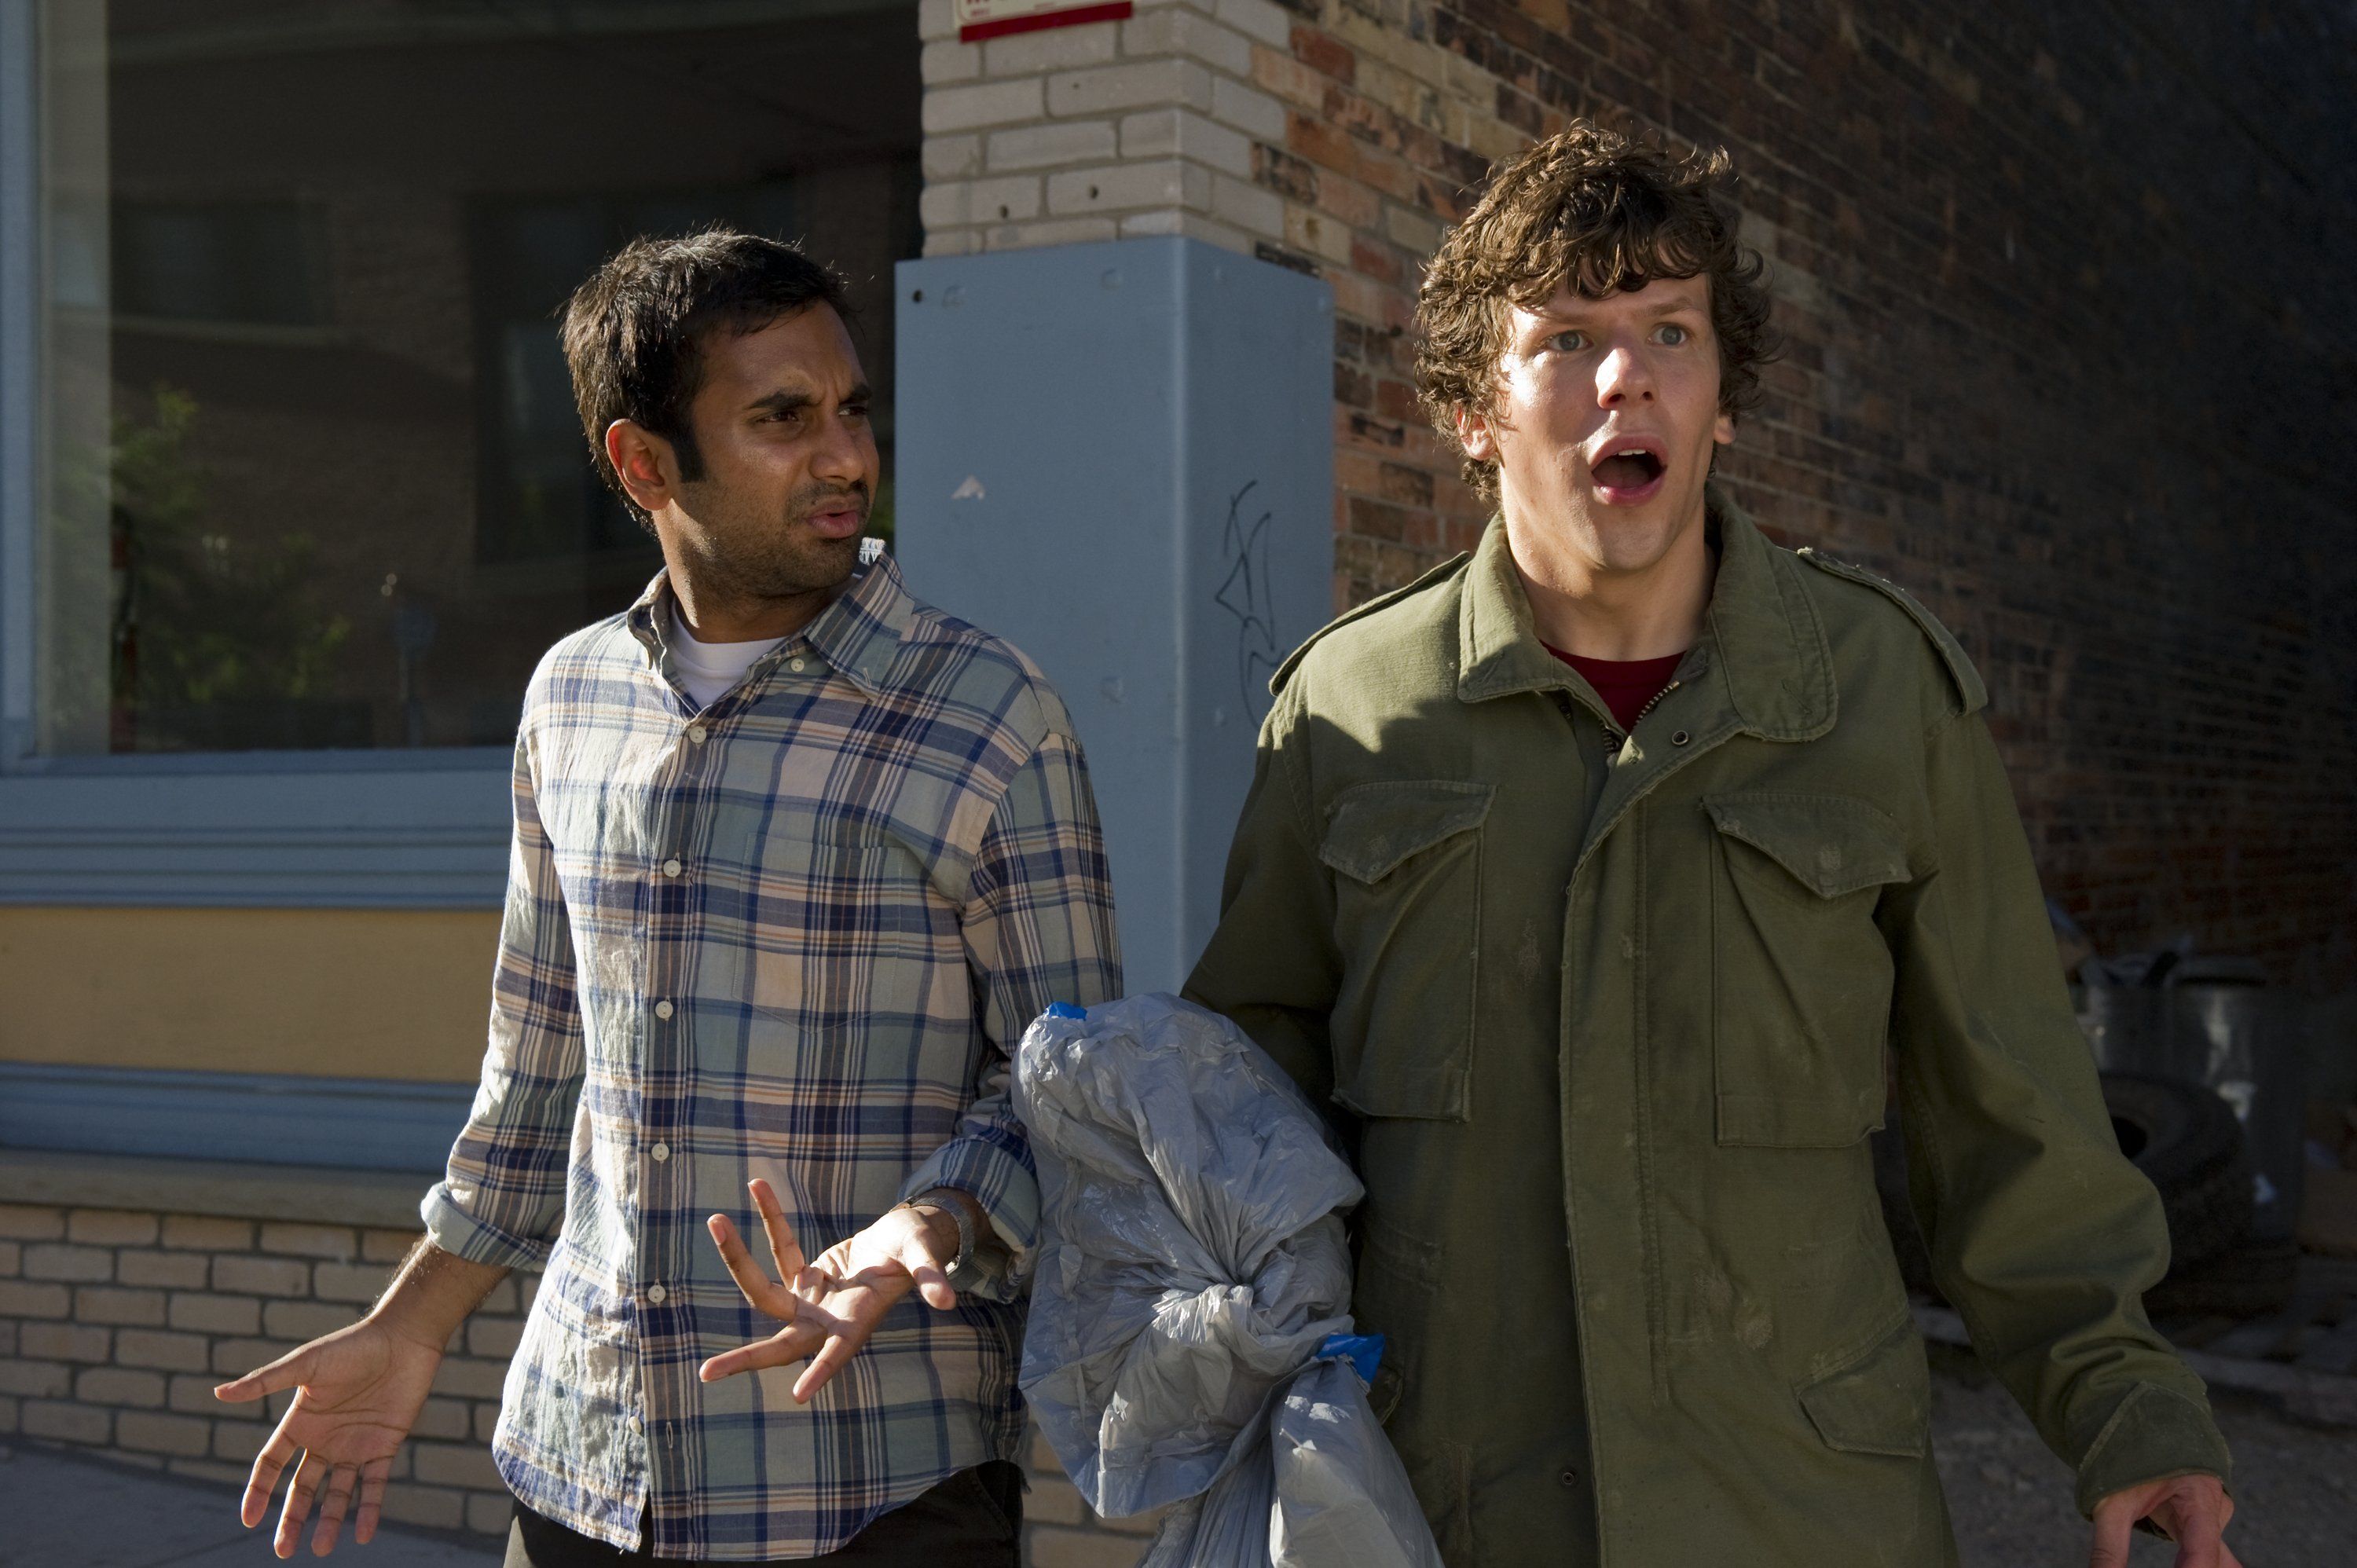 Jesse Eisenberg and Aziz Ansari star in 30 Minutes or LessThe actor talked further about improvising on the set and collaborating with the director. You know {35}'s always like, if you have any ideas, try them. I think when you start to talk about improvising, it gets to be actors, just saying dumb stuff randomly like on Whose Line Is It Anyway?, or something. But I try to think of it as rewriting in the moment. Like really looking to see if there is any alternate jokes or something like that, a